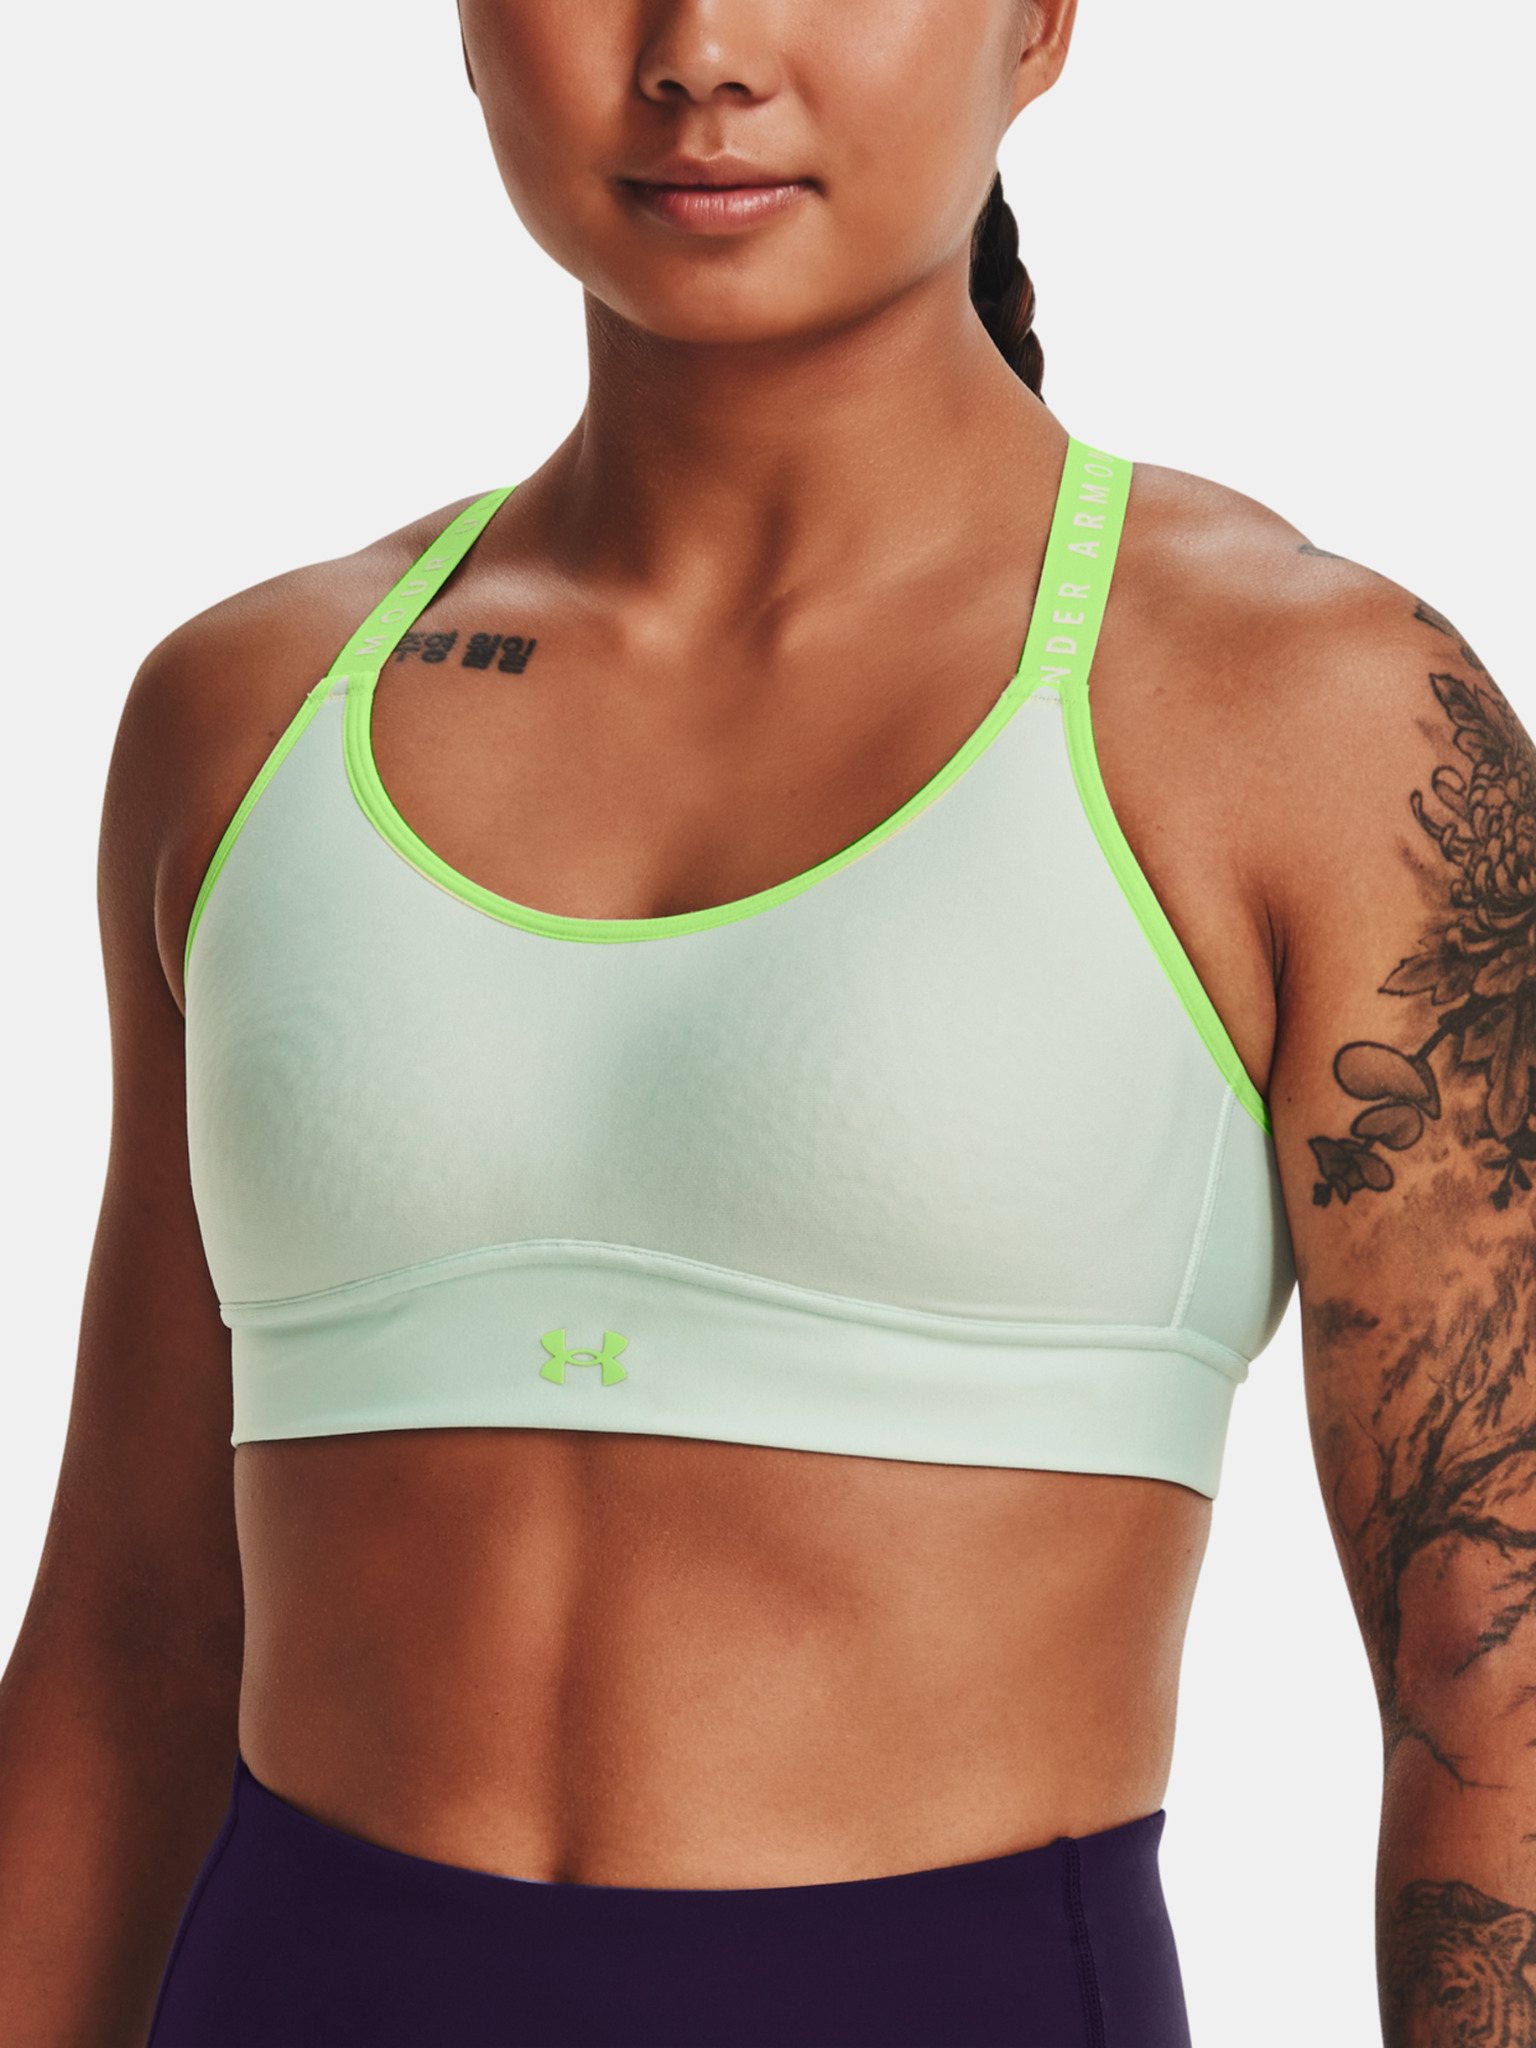 Under Armour Women's UA Infinity Mid Covered Sports Bra 1363353 - New